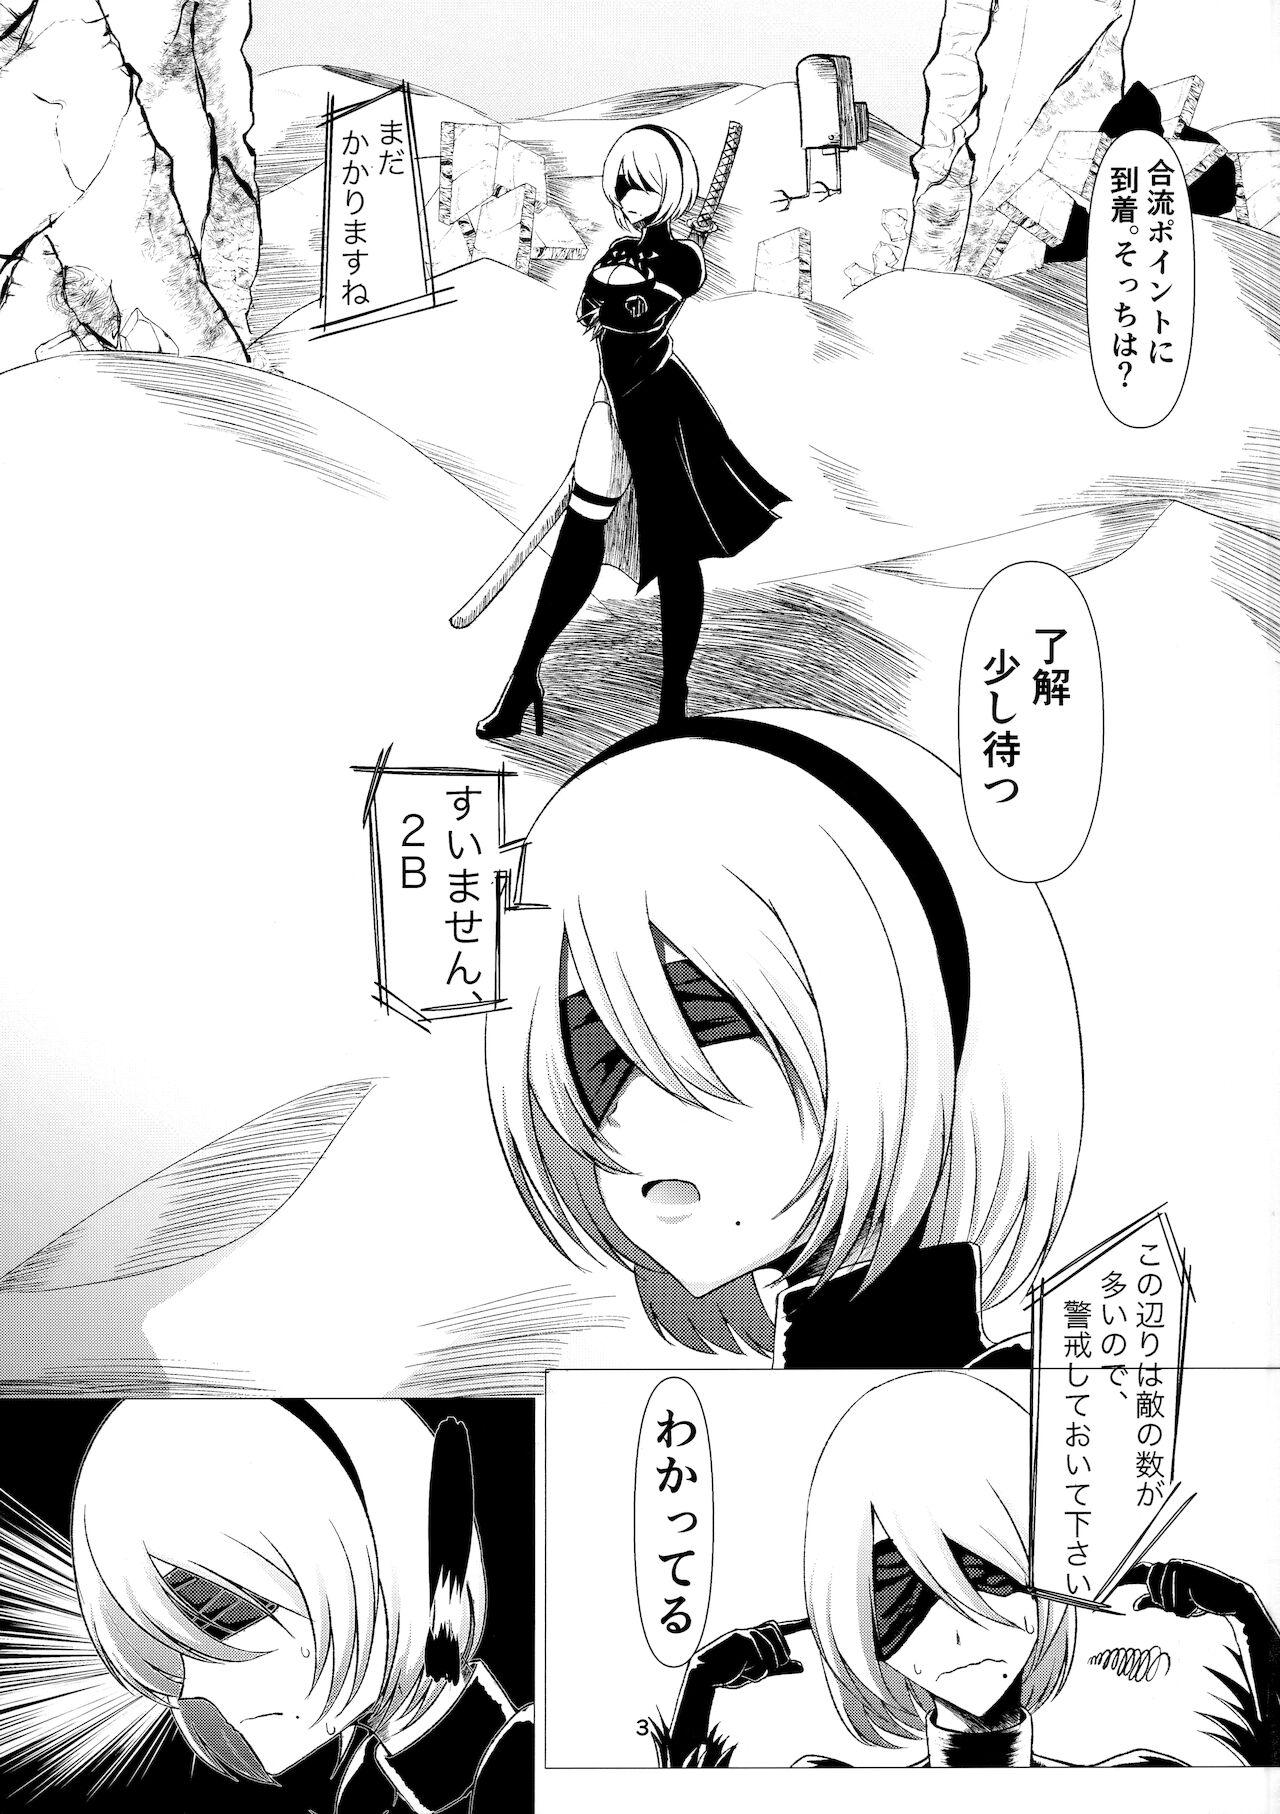 Por E690BEE4B9B3E88289E5A5B4E99AB7 2B - Nier automata Ruiva - Page 2